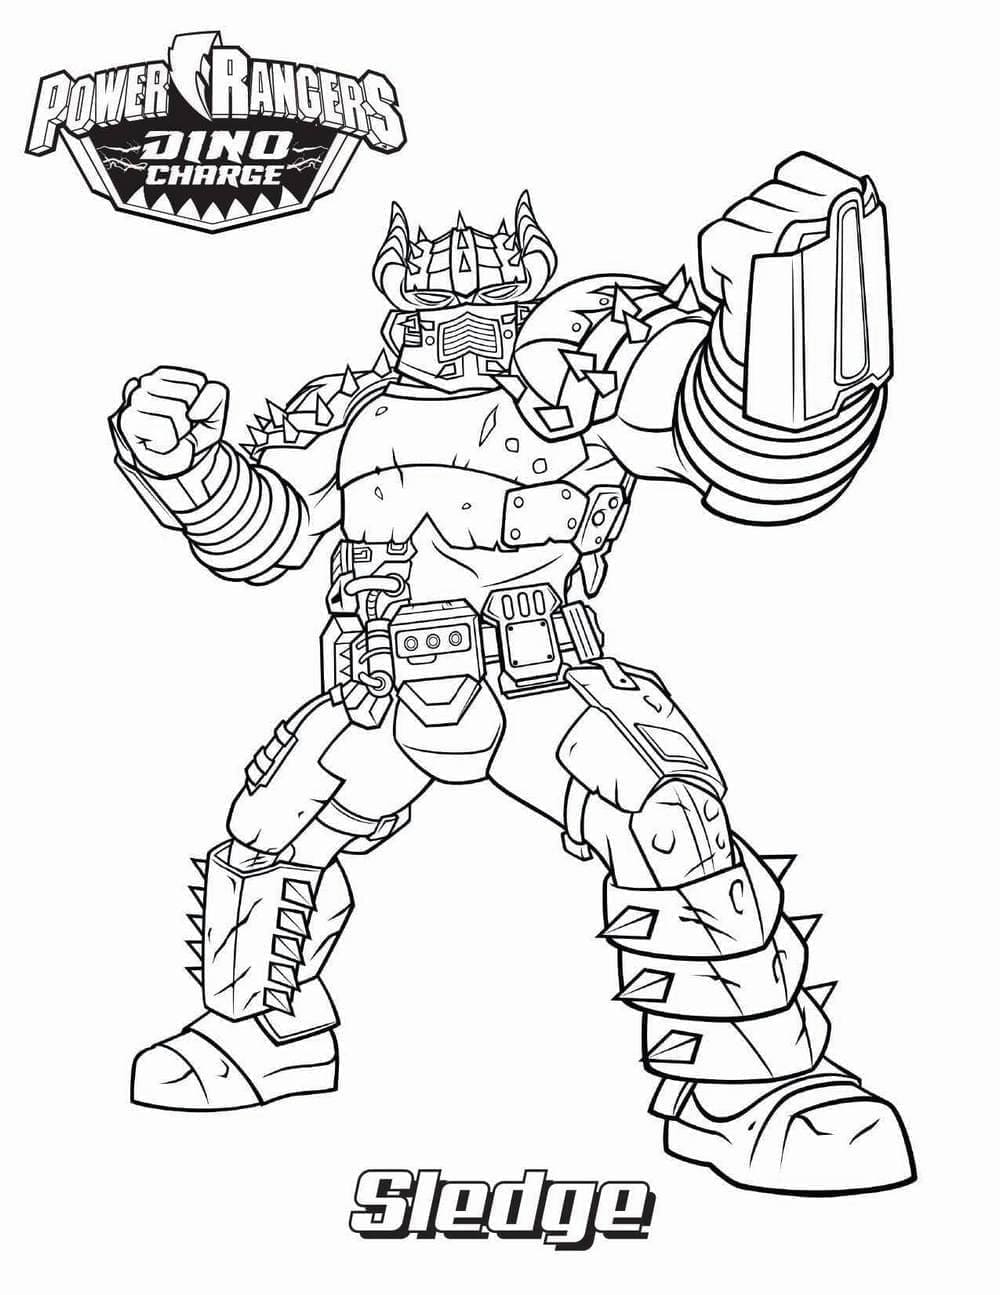 Power Rangers Dino Charge Sledge coloring page